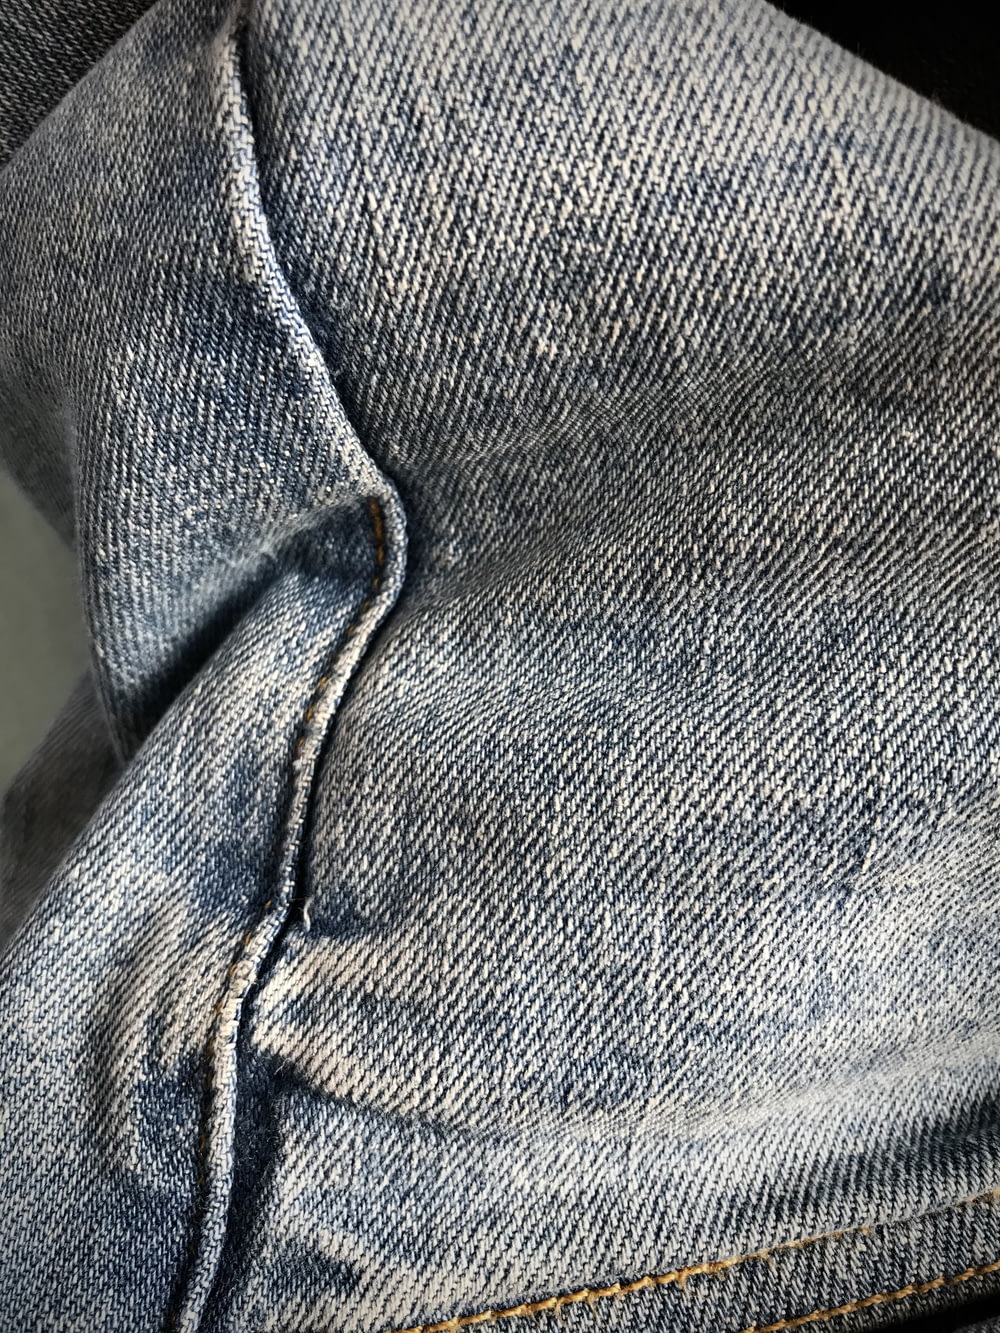 person in blue denim jeans